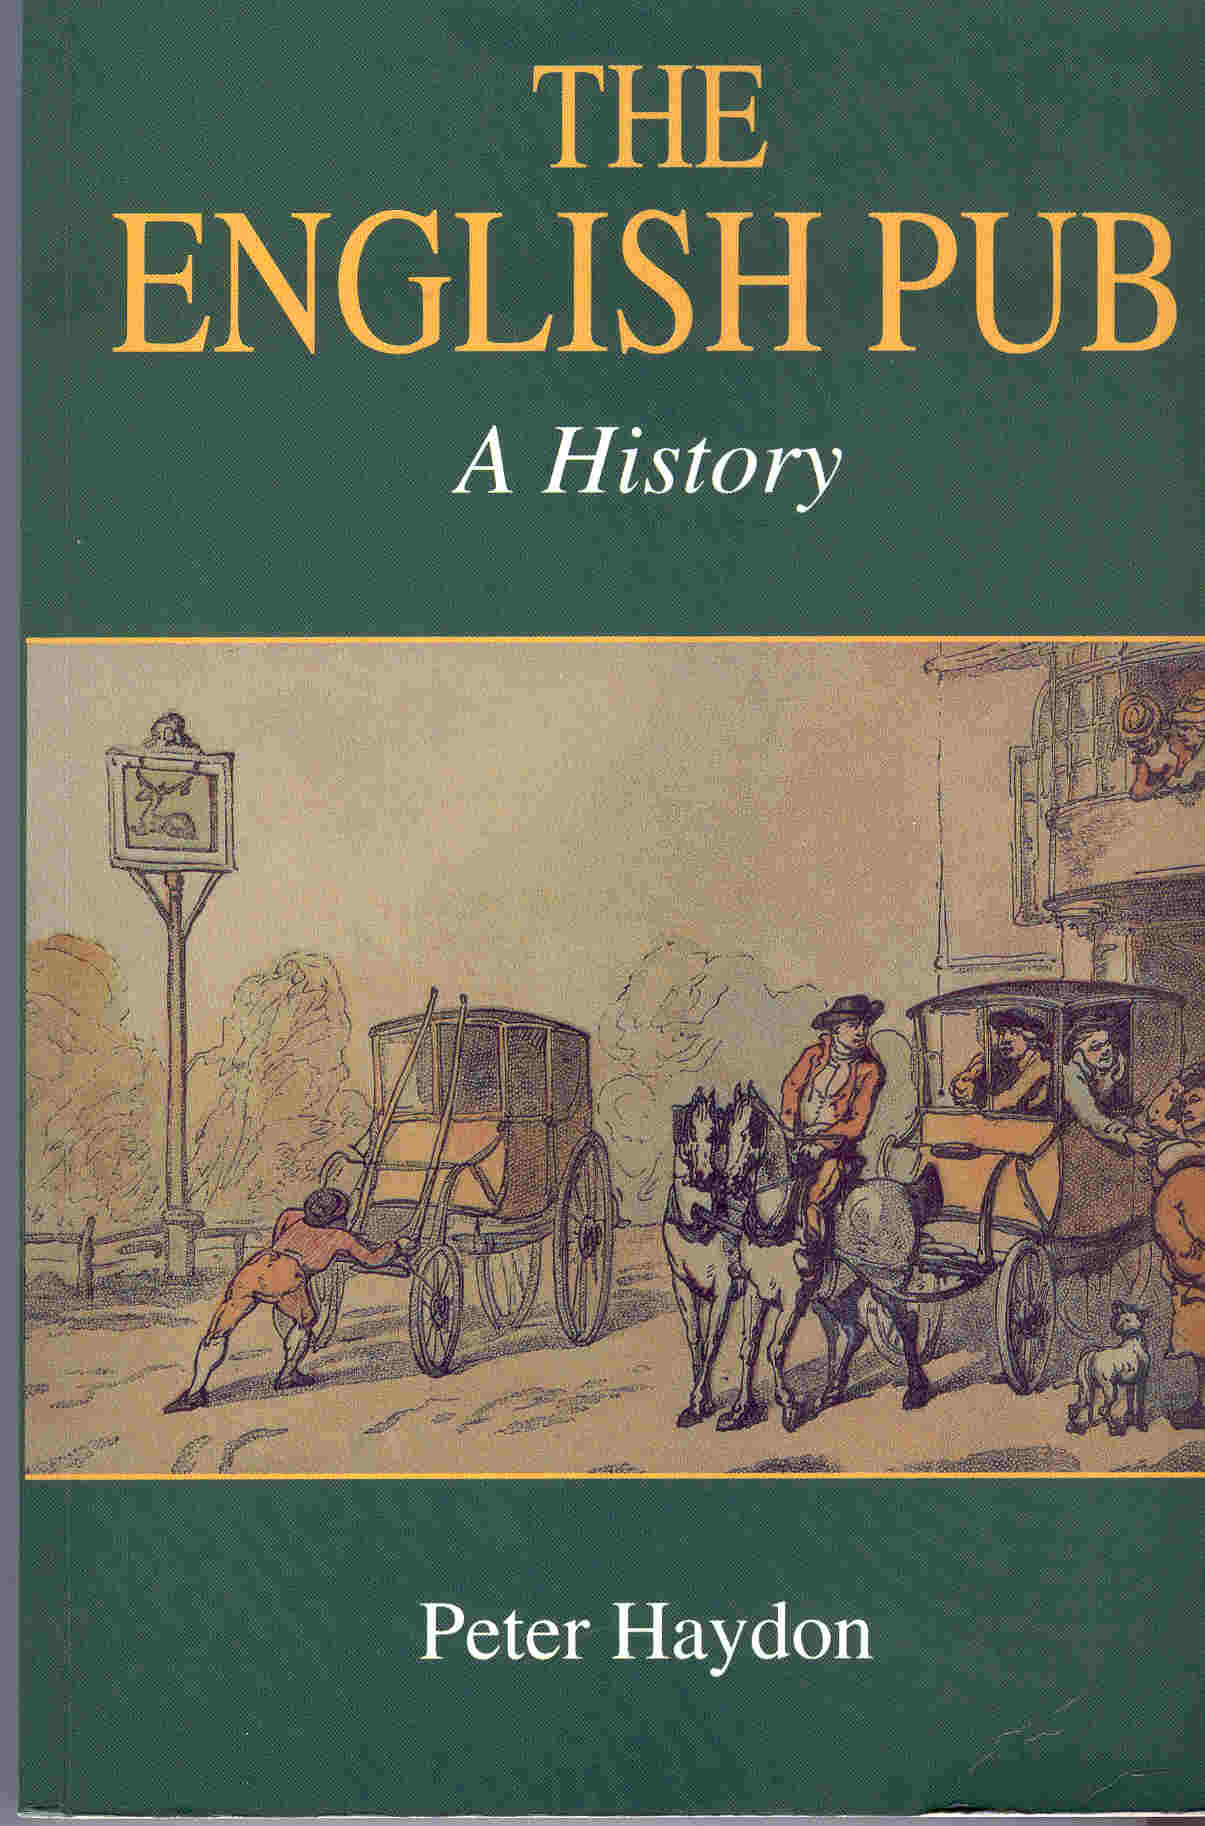 The best book for pub history